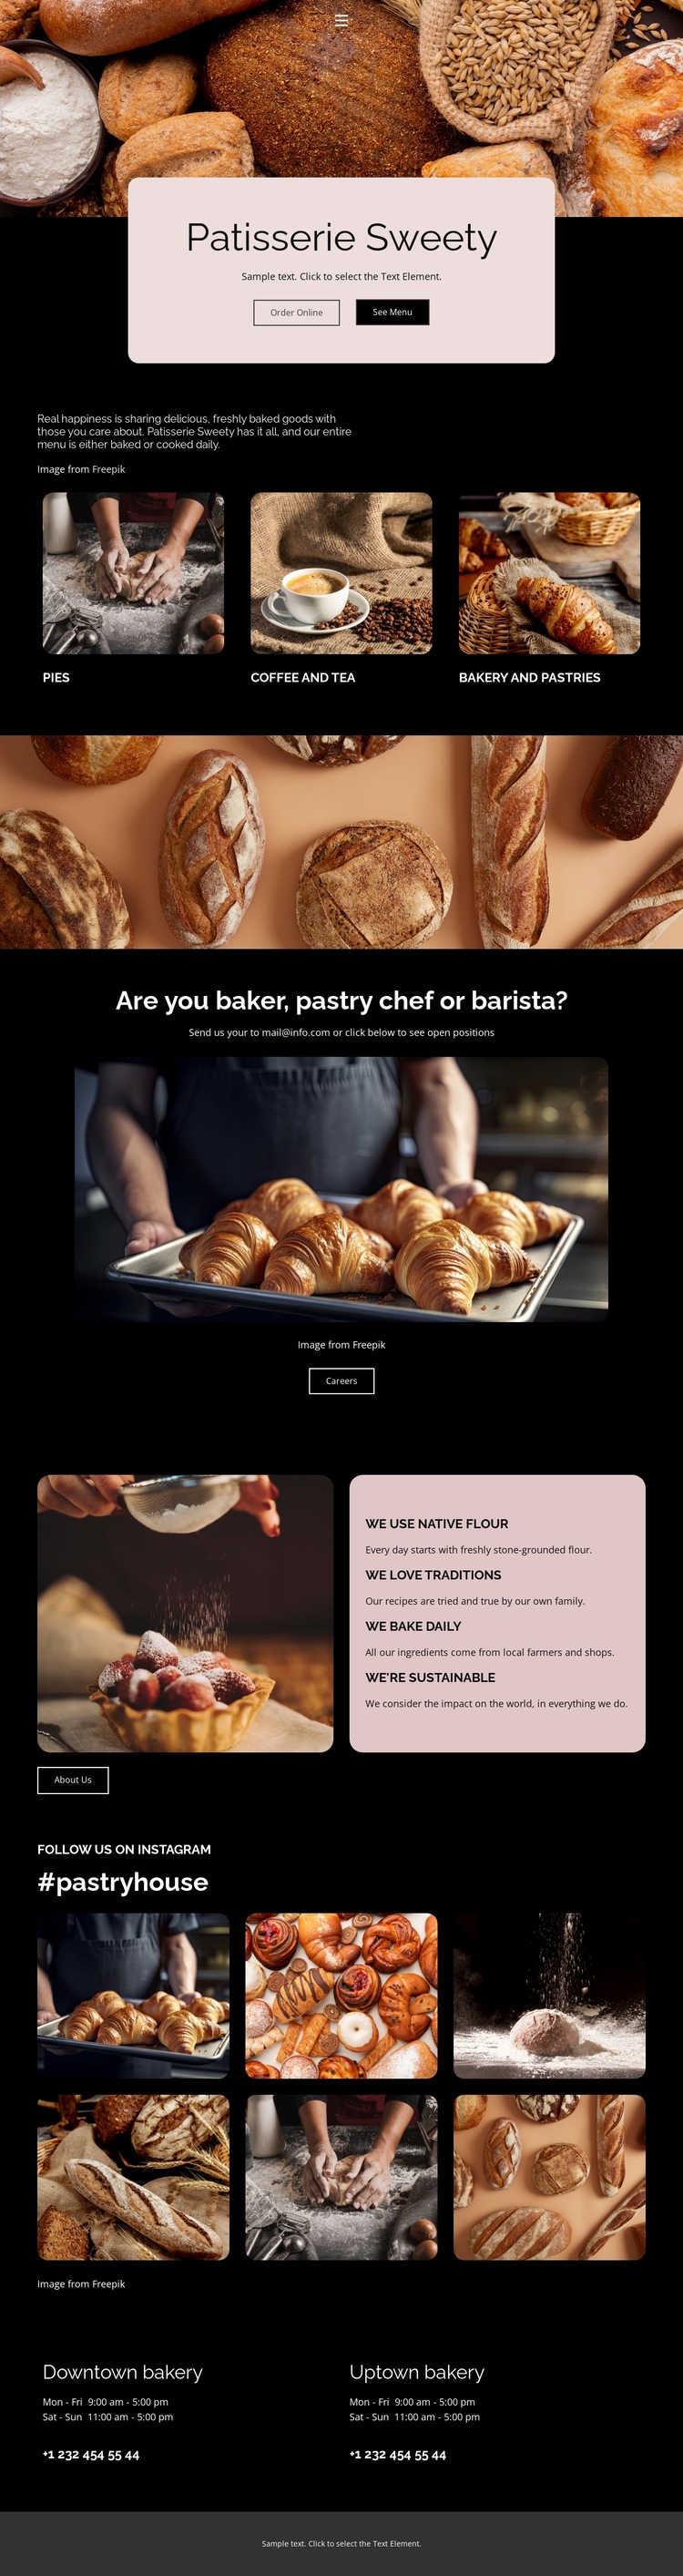 We love traditions HTML5 Template